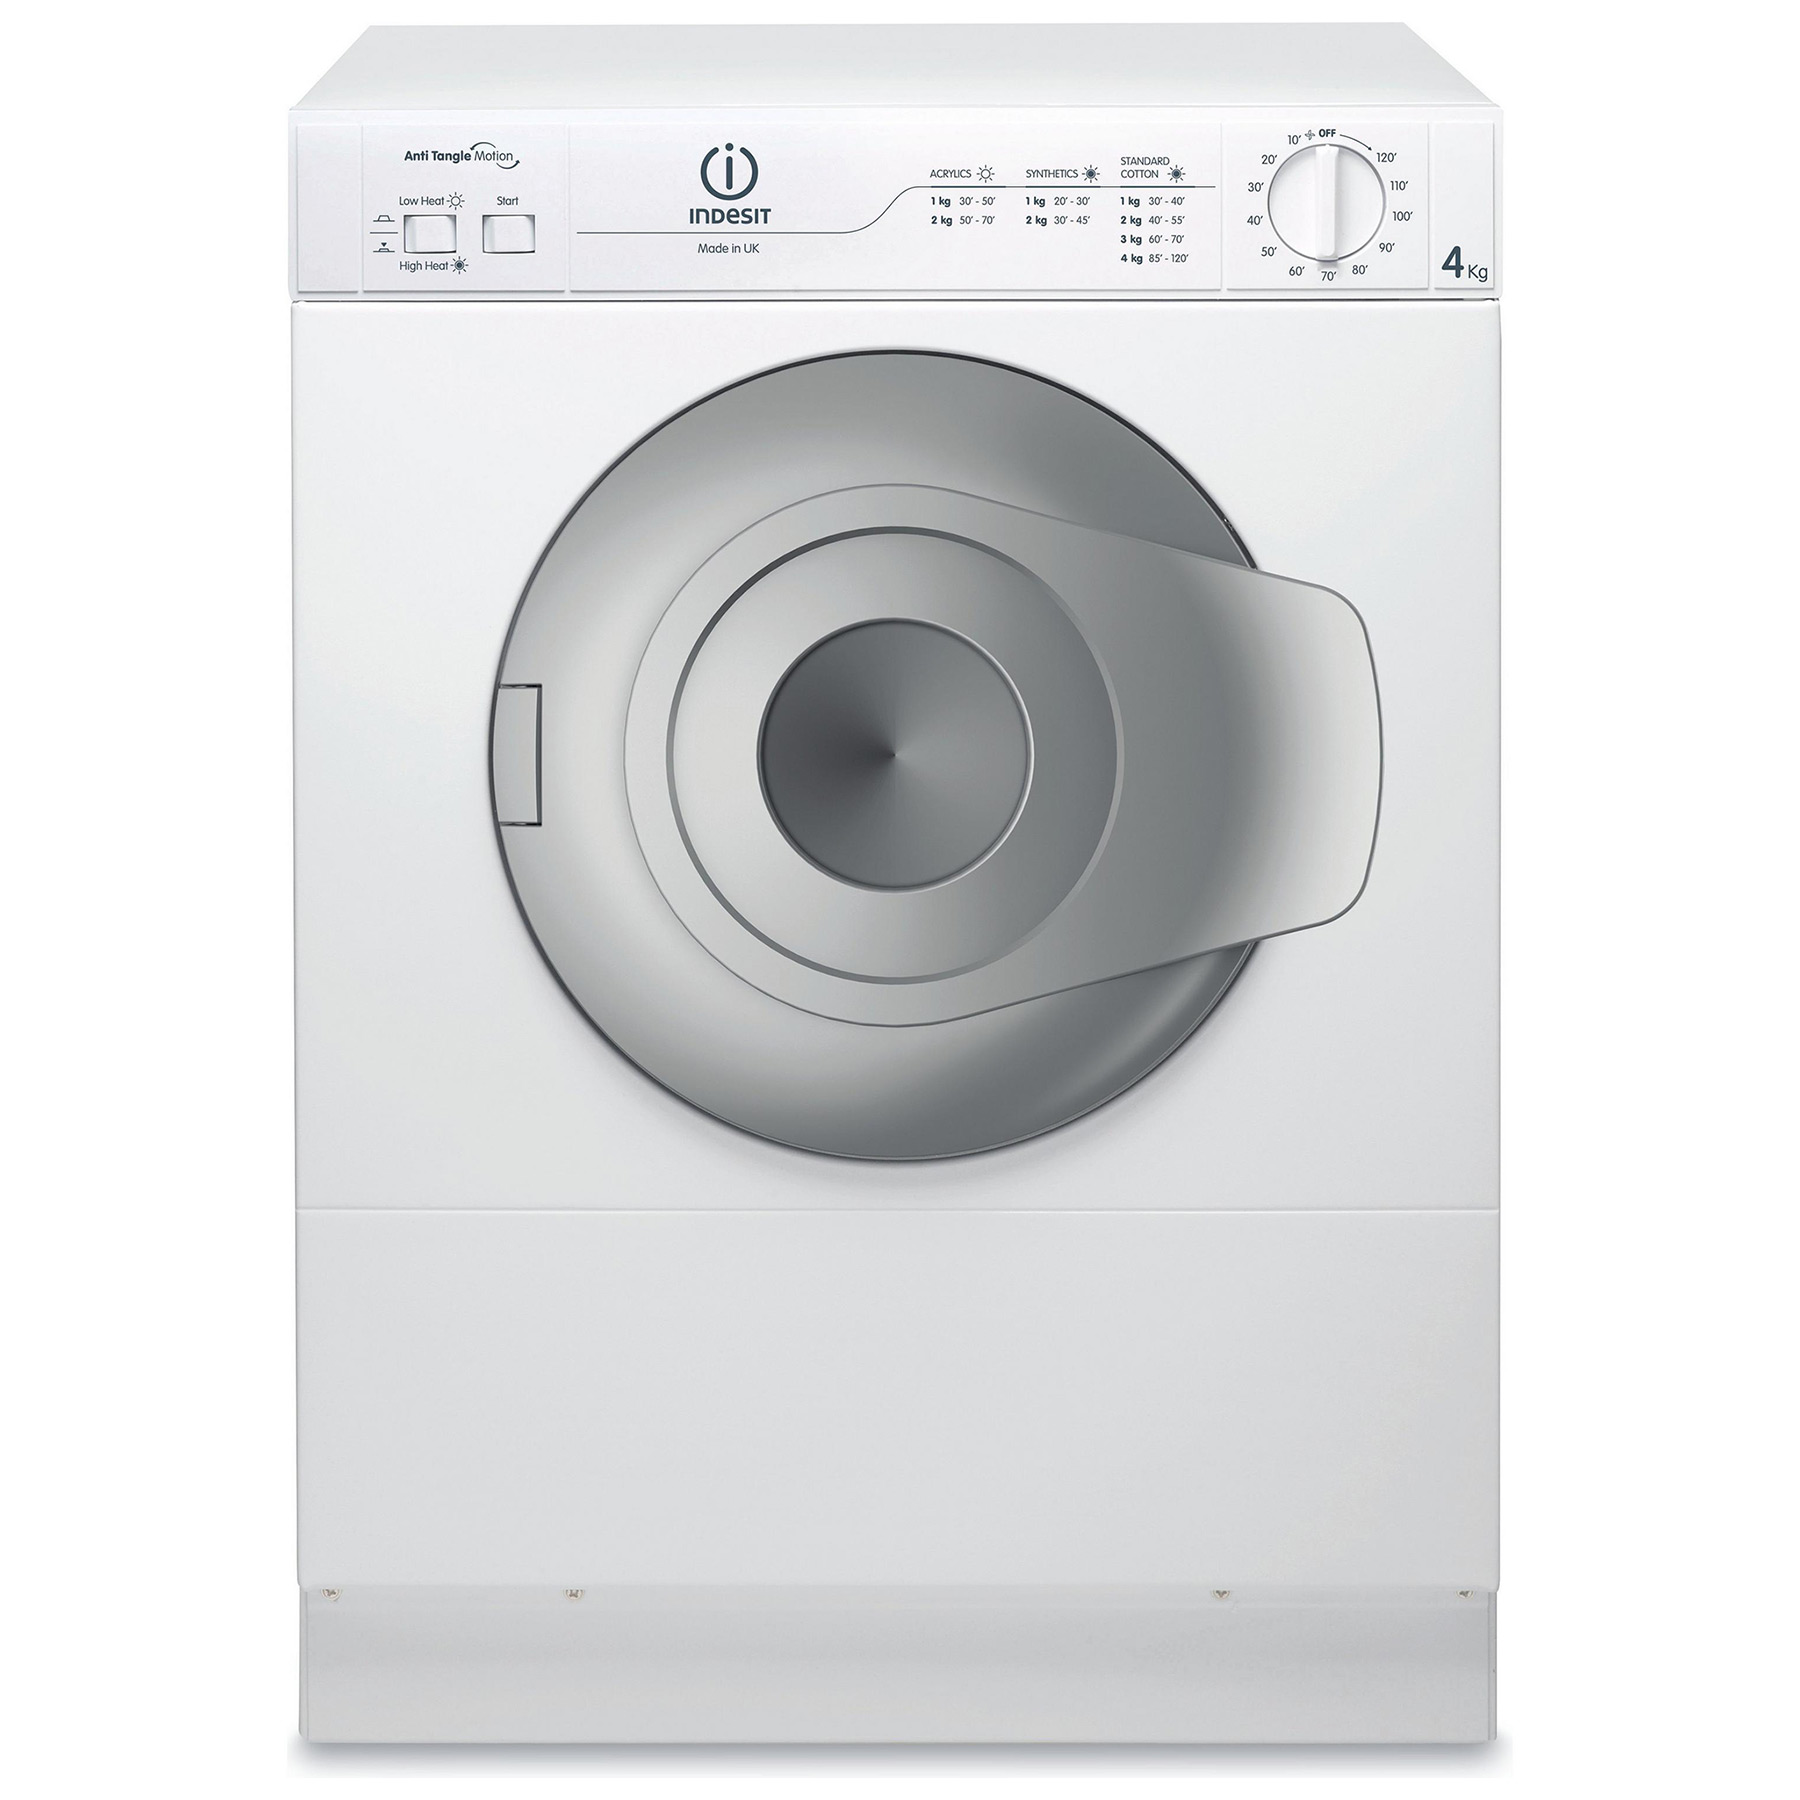 Image of Indesit NIS41V 4kg Compact Vented Dryer in White C Rated